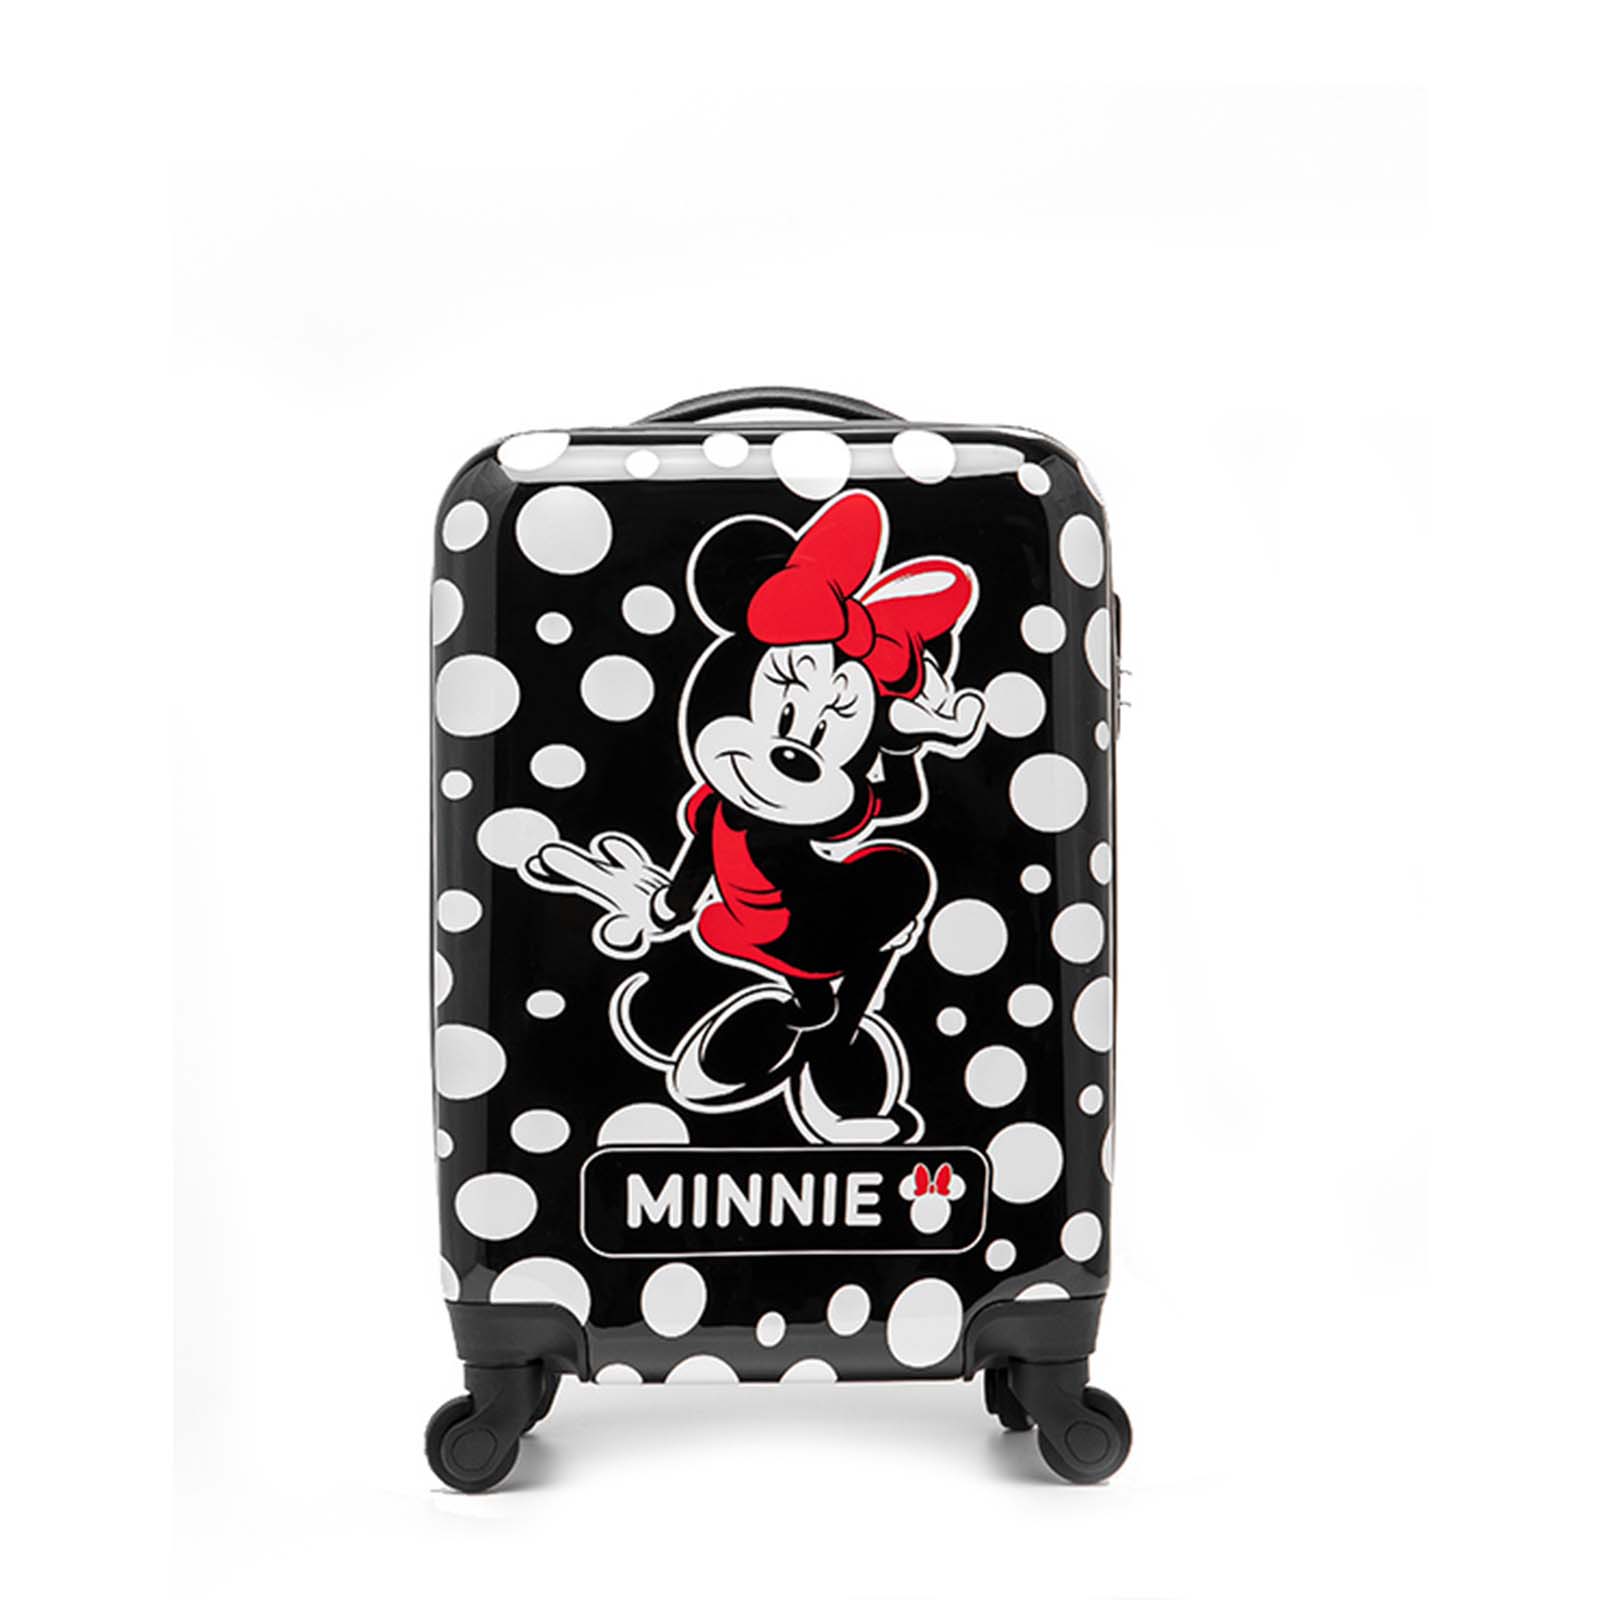 Disney-Minnie-Mouse-20inch-Carry-On-Suitcase-Front